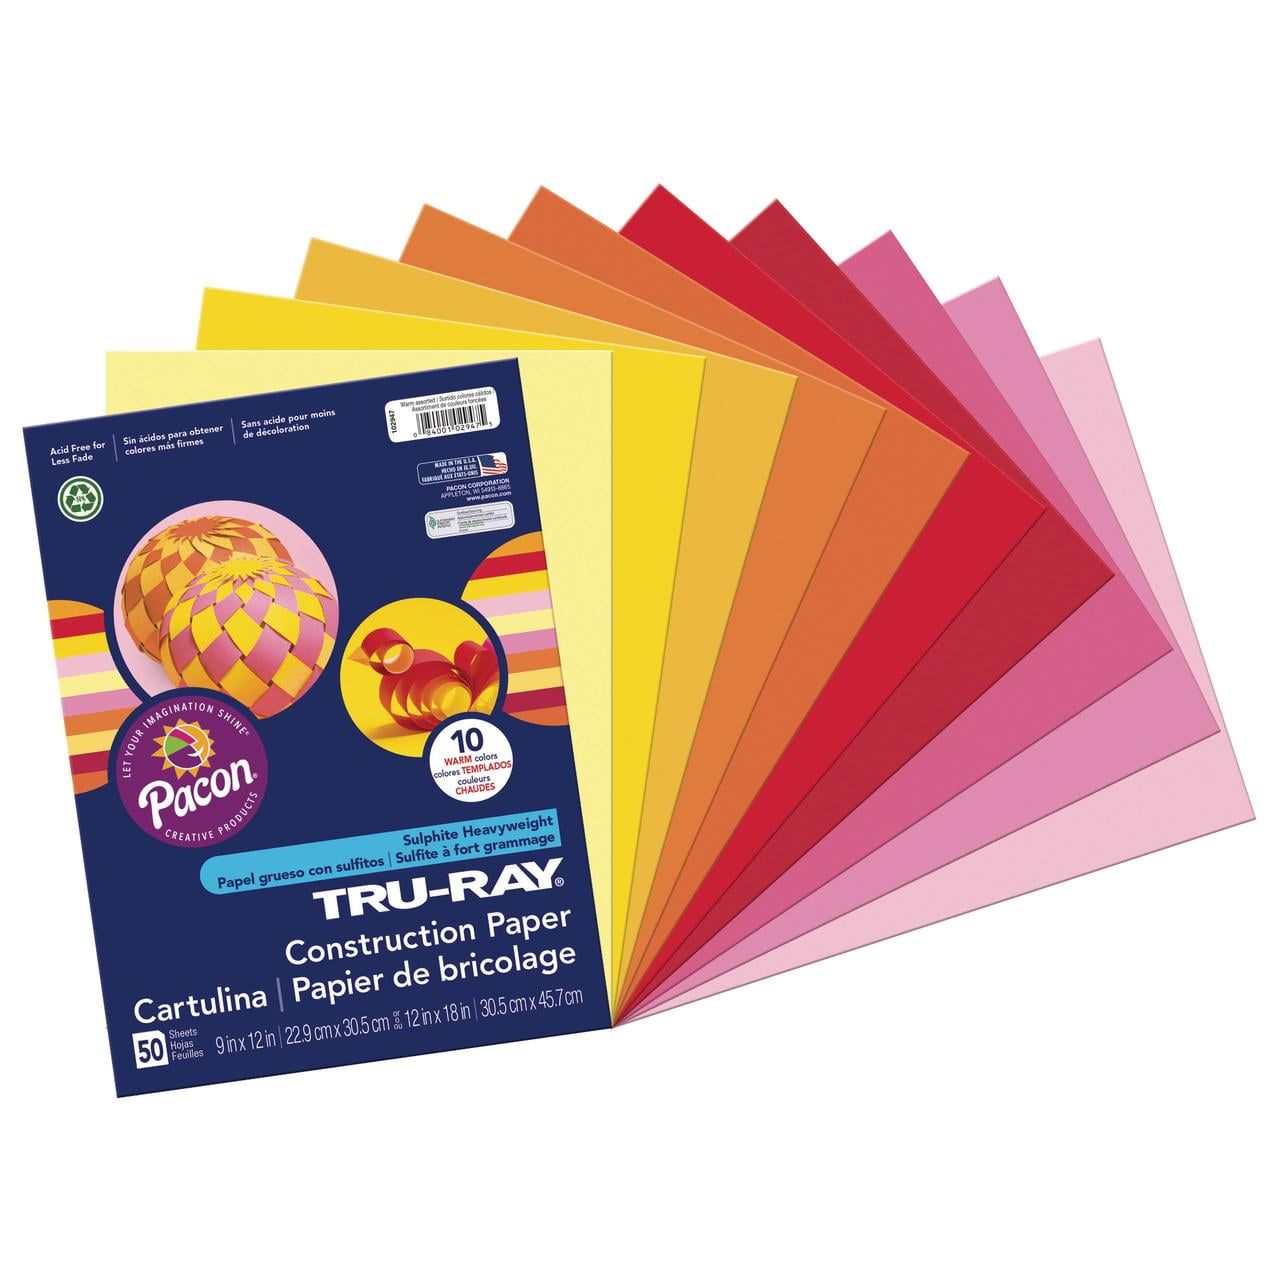 Pacon Tru-Ray Construction Paper - 9 x 12, Assorted Warm Colors